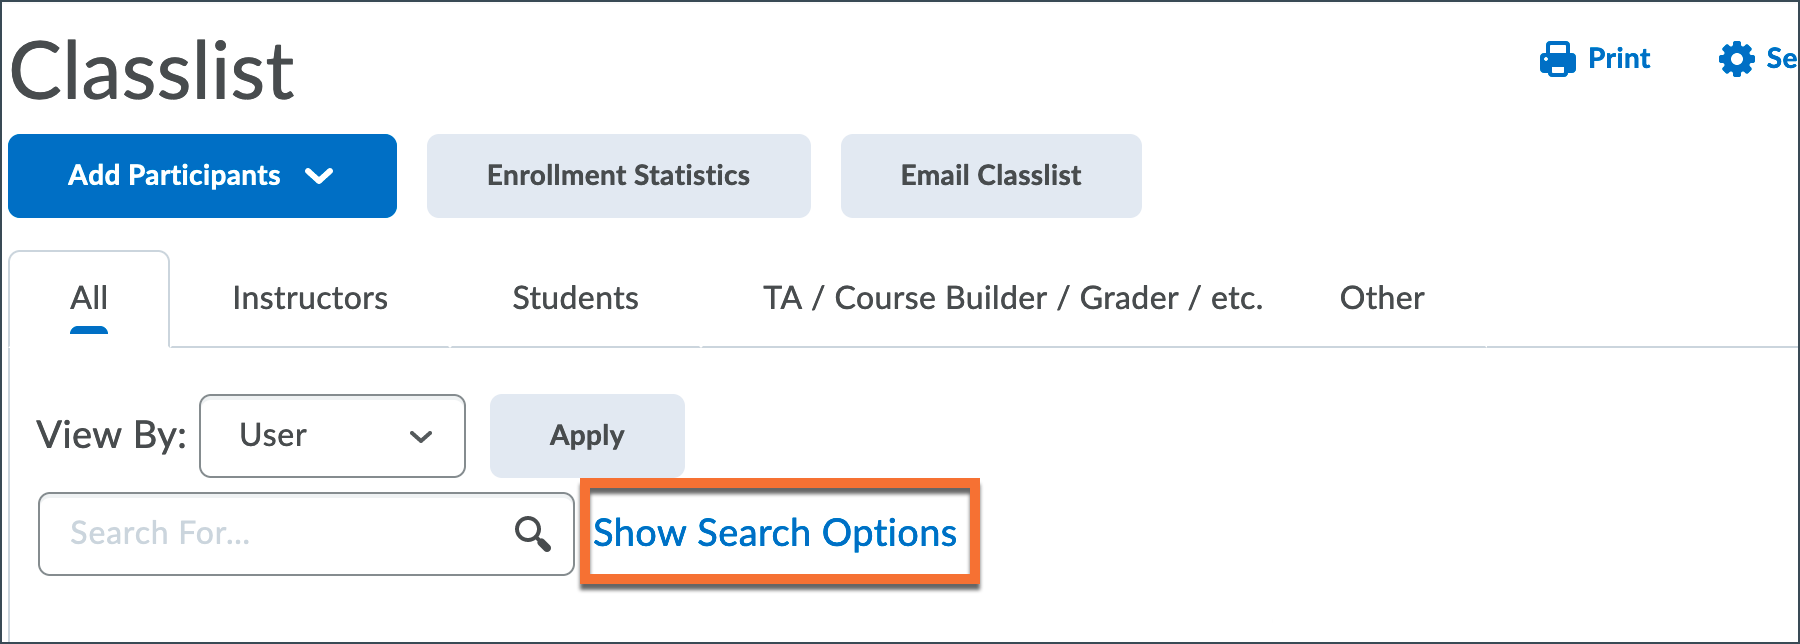 Filter the classlist search results